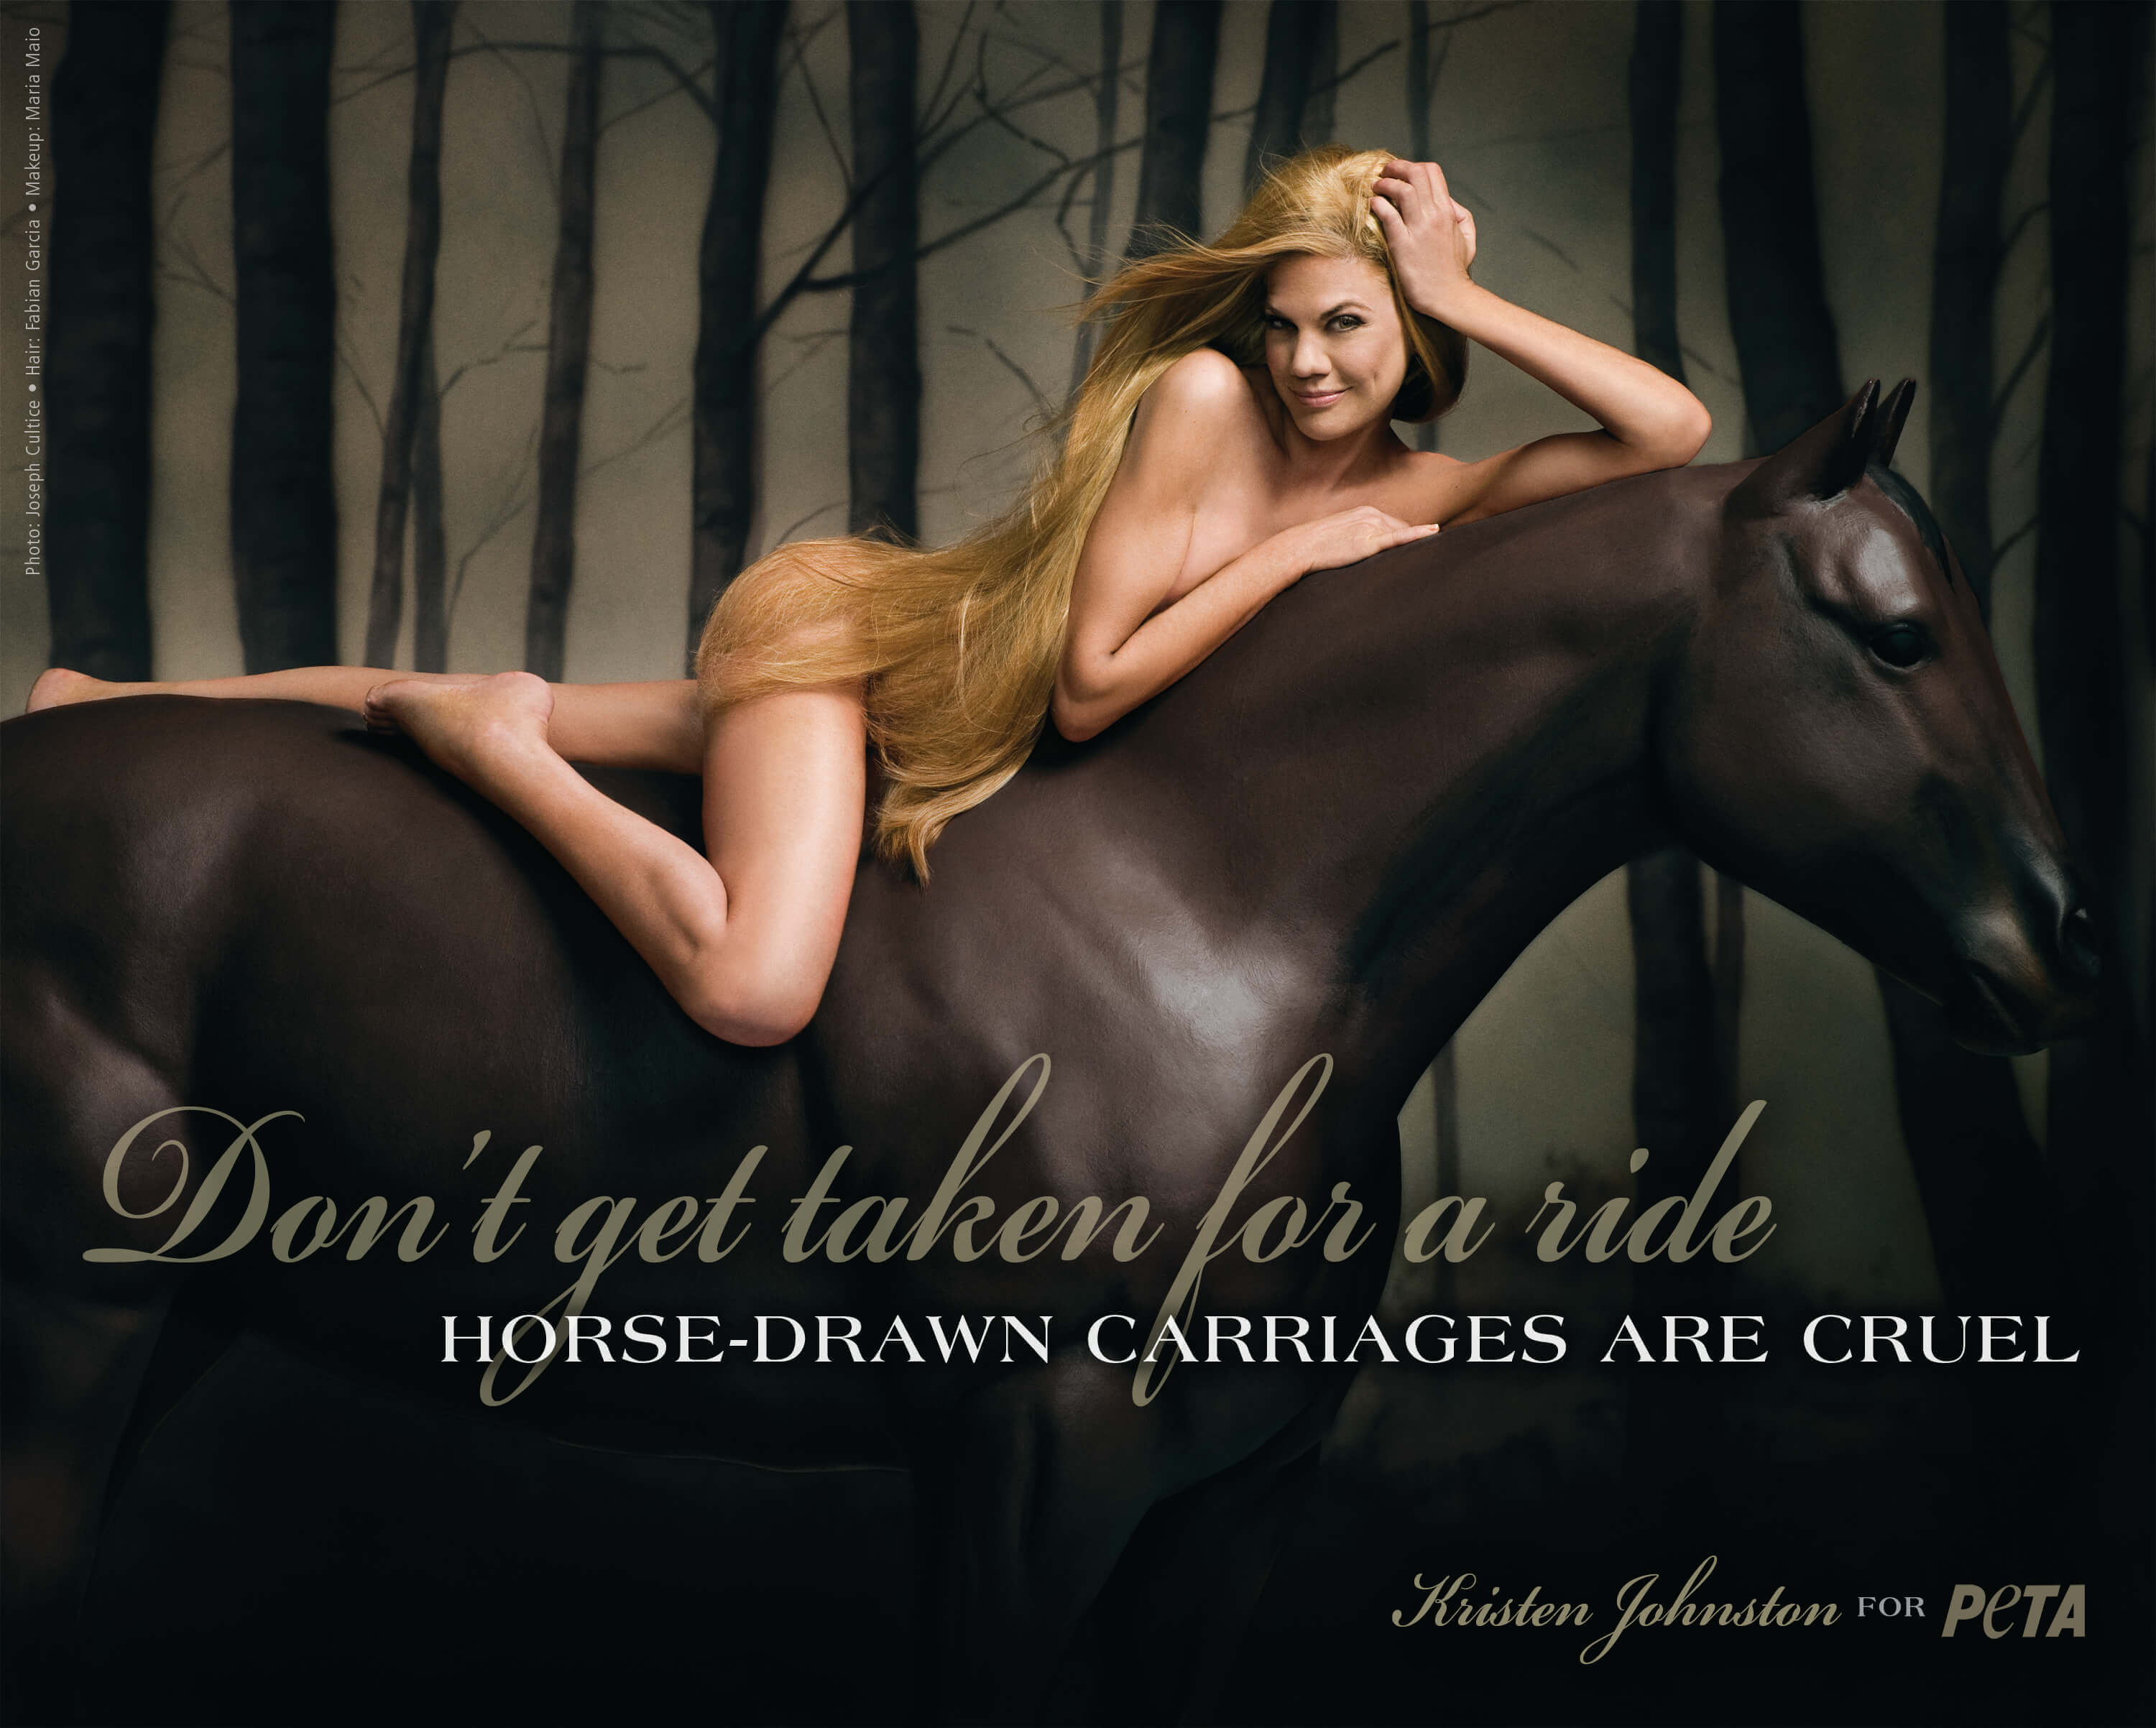 Kristen Johnston Poses Nude in Ad Against Horse-Drawn Carriages PETA image